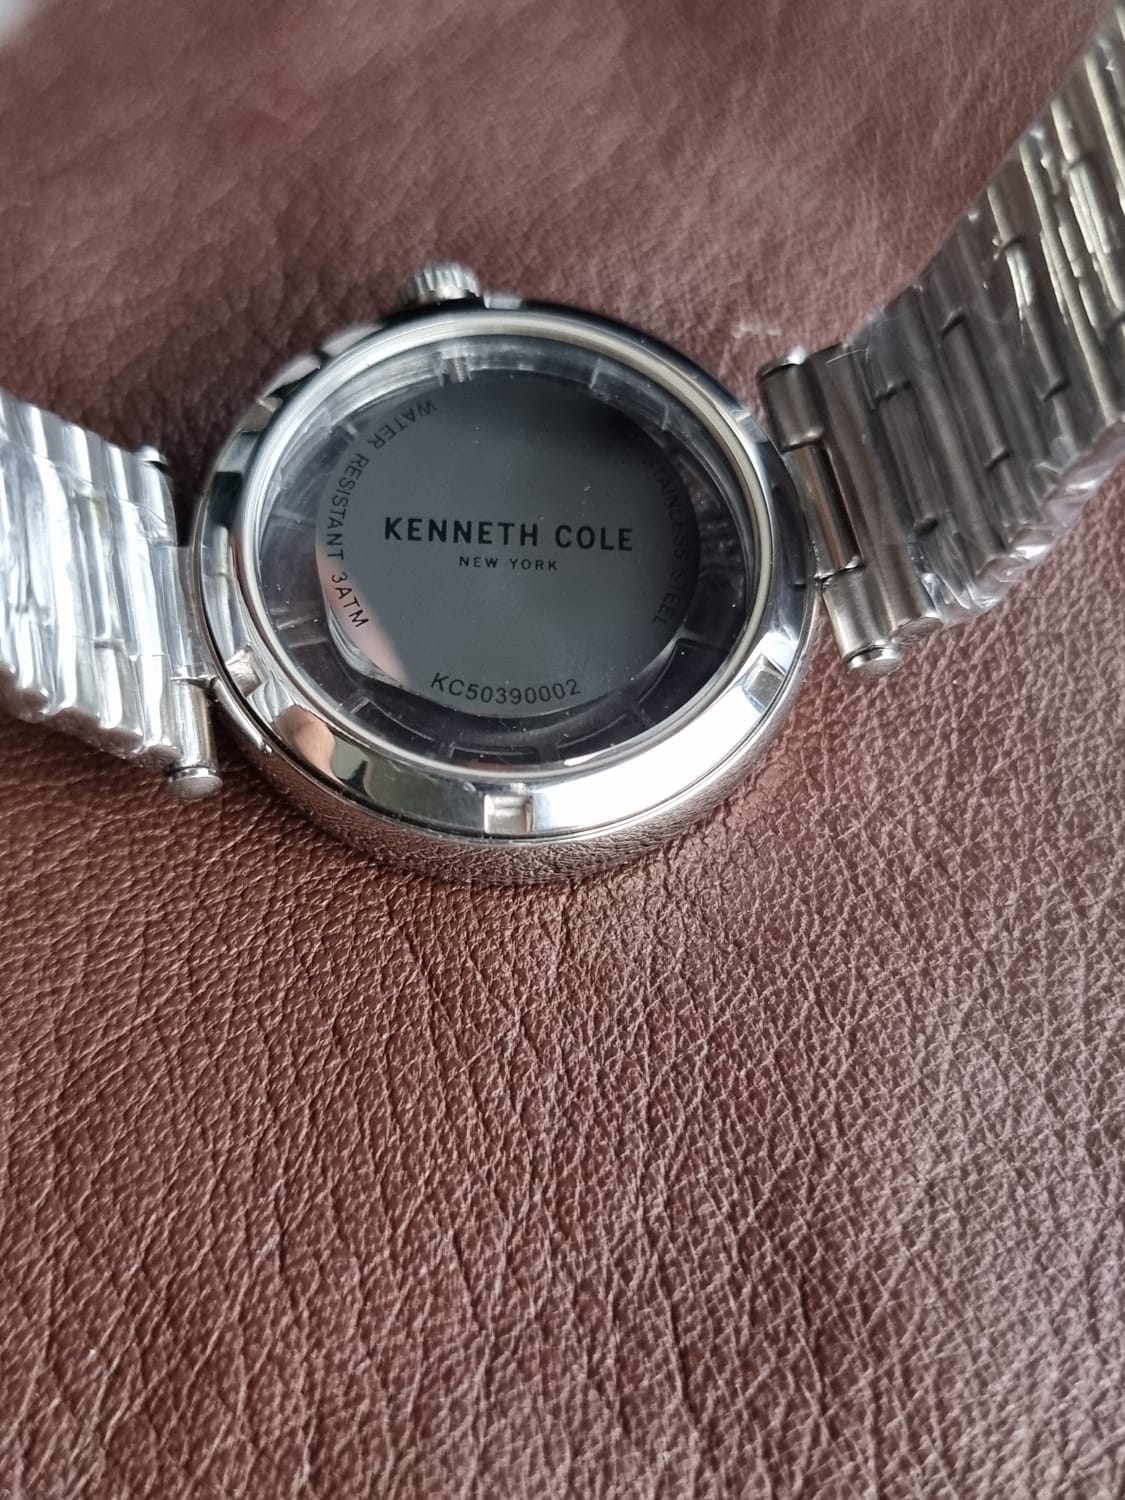 kenneth cole ladies watch 34mm dial size silver chain